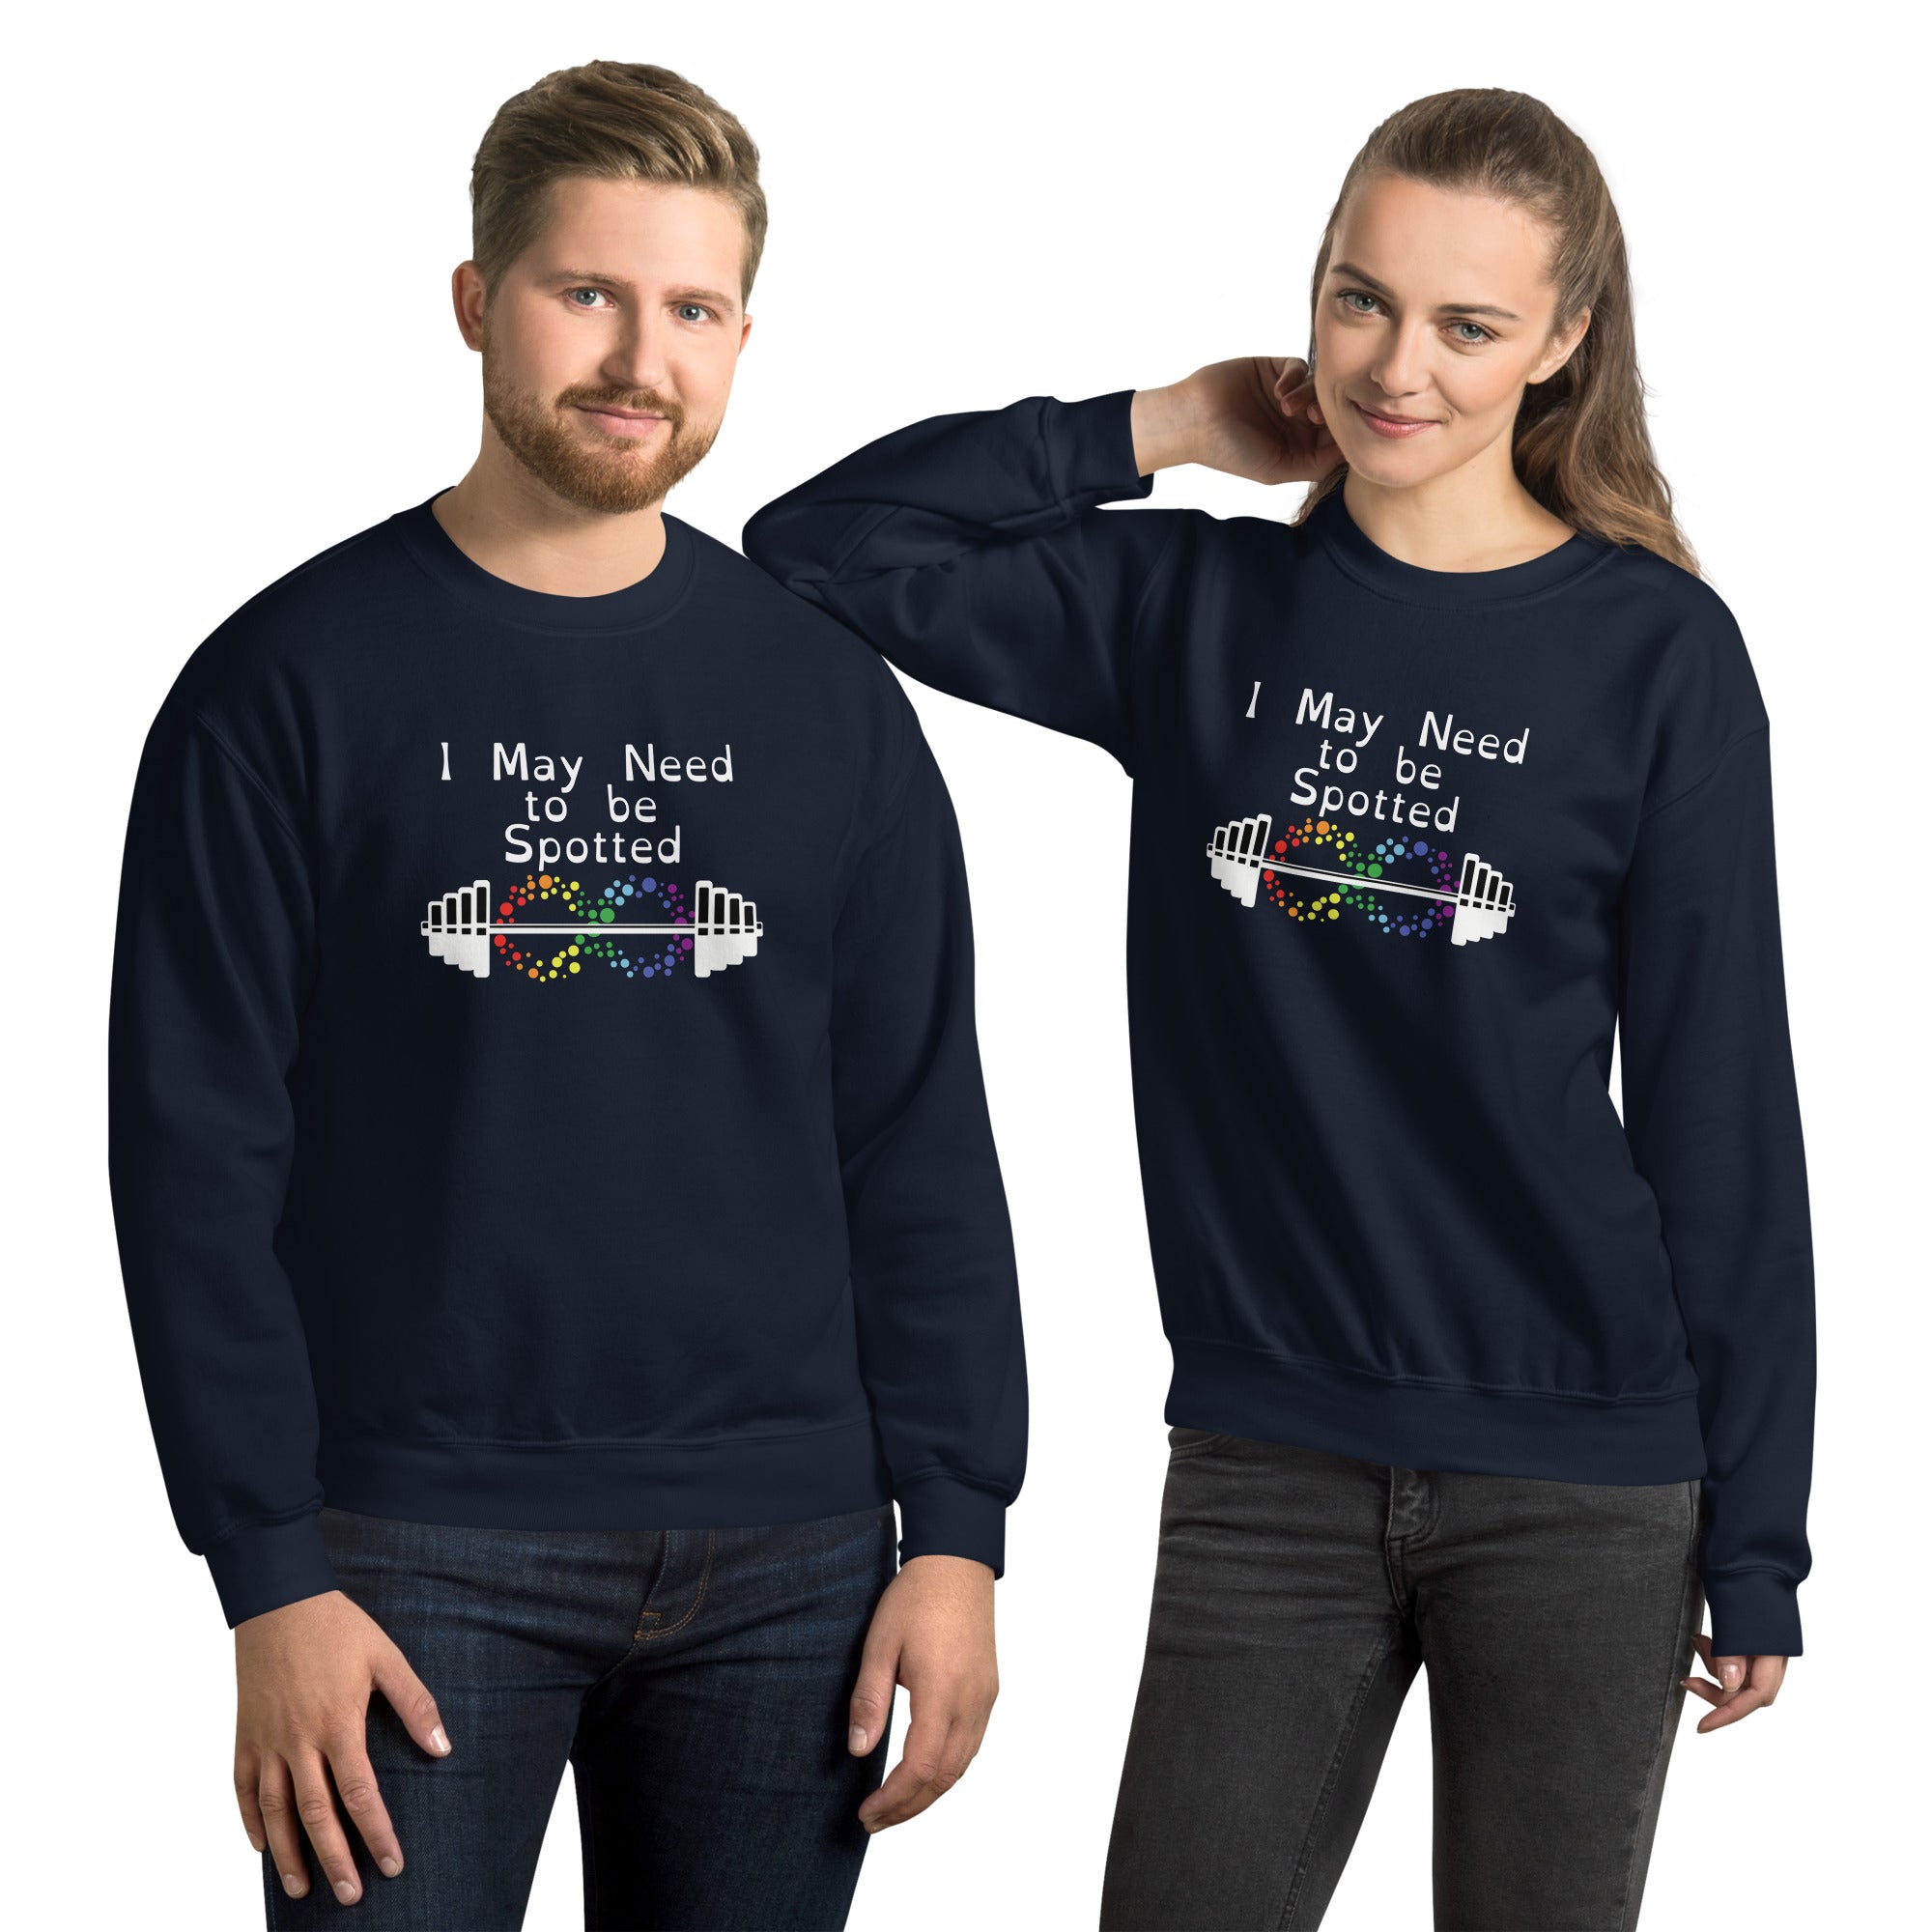 I May Need to be Spotted Unisex Sweatshirt